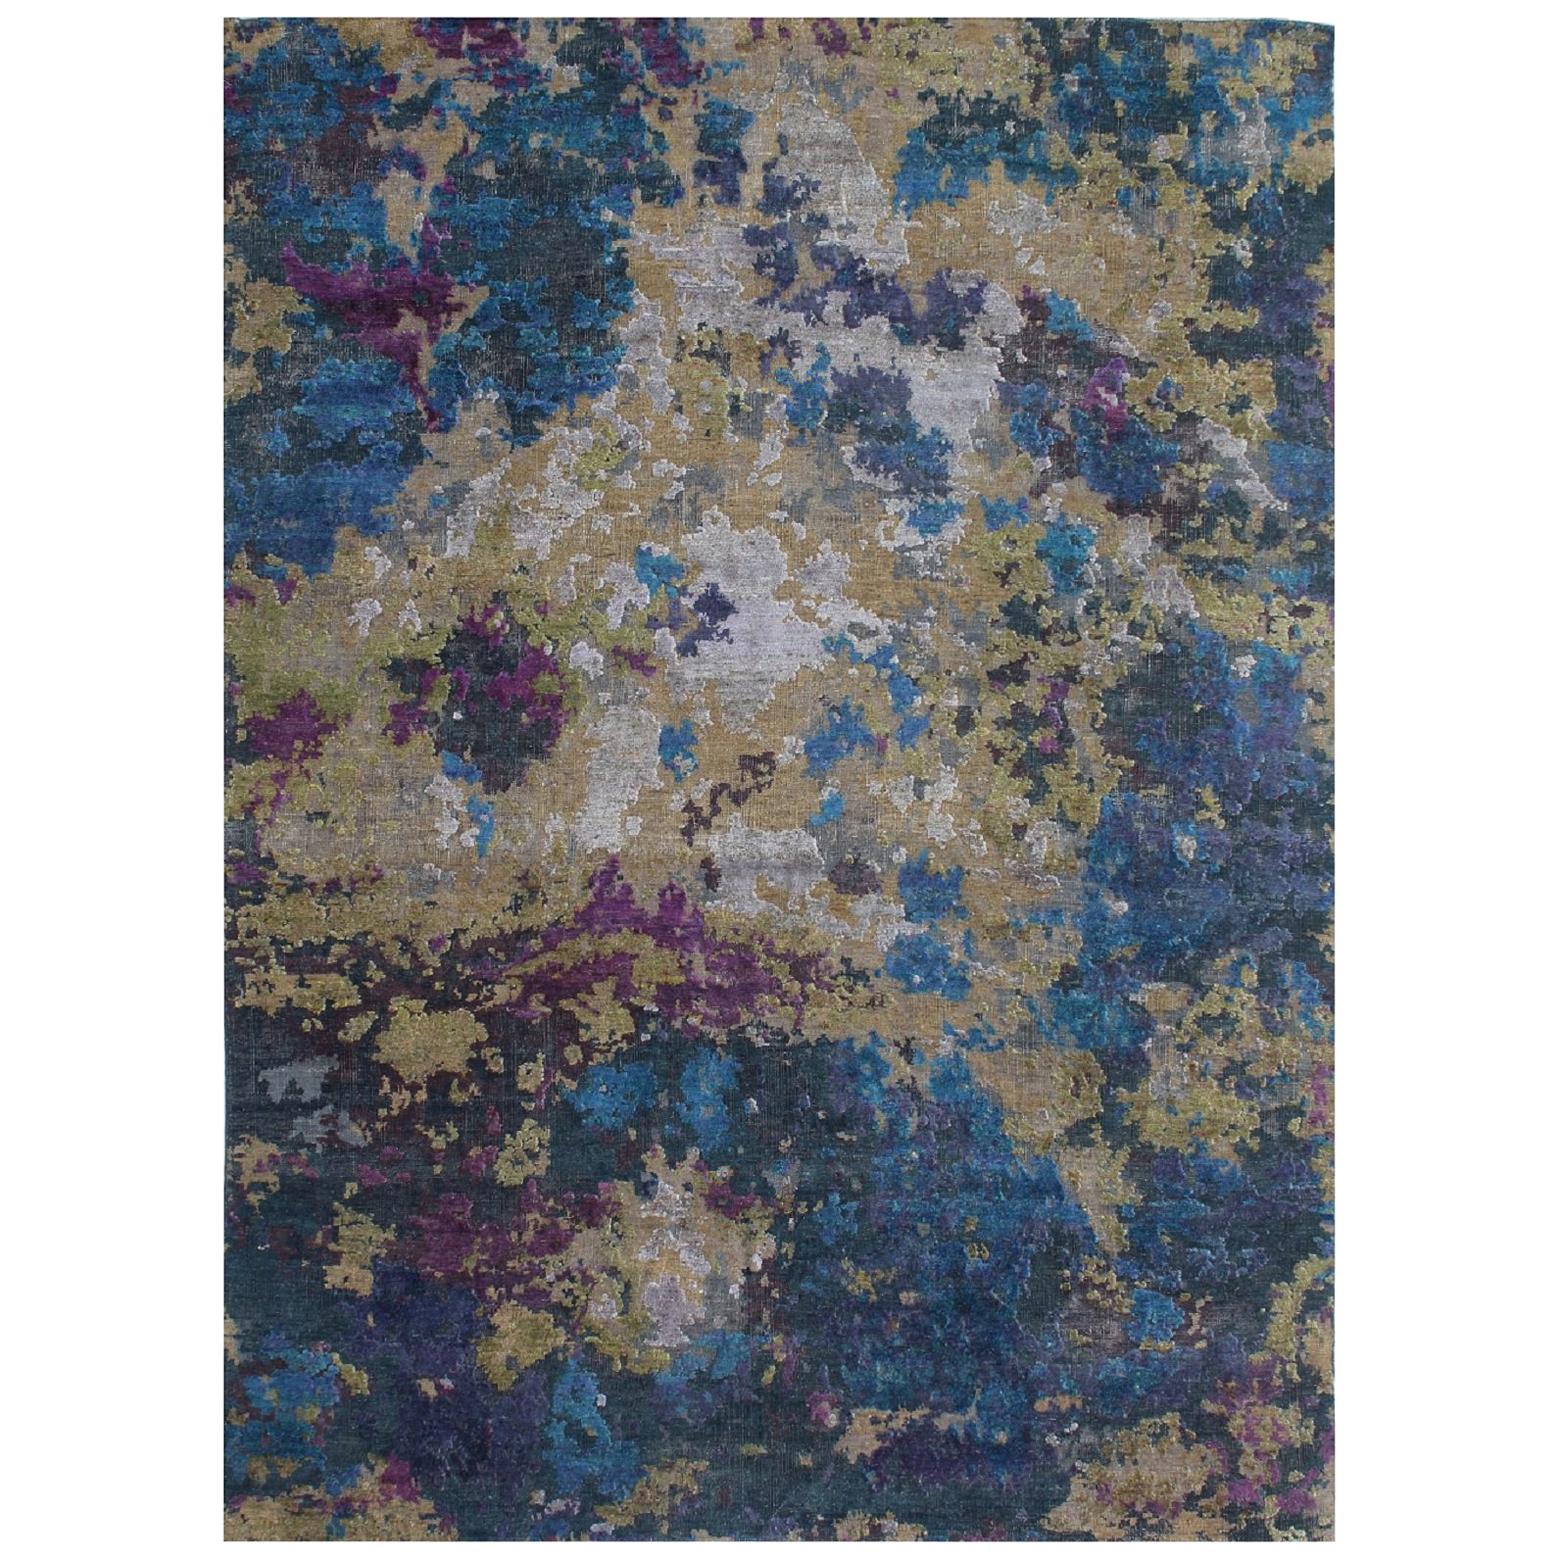 Organic Contemporary Blue Green Purple Hand-Knotted Wool and Silk Rug in Stock